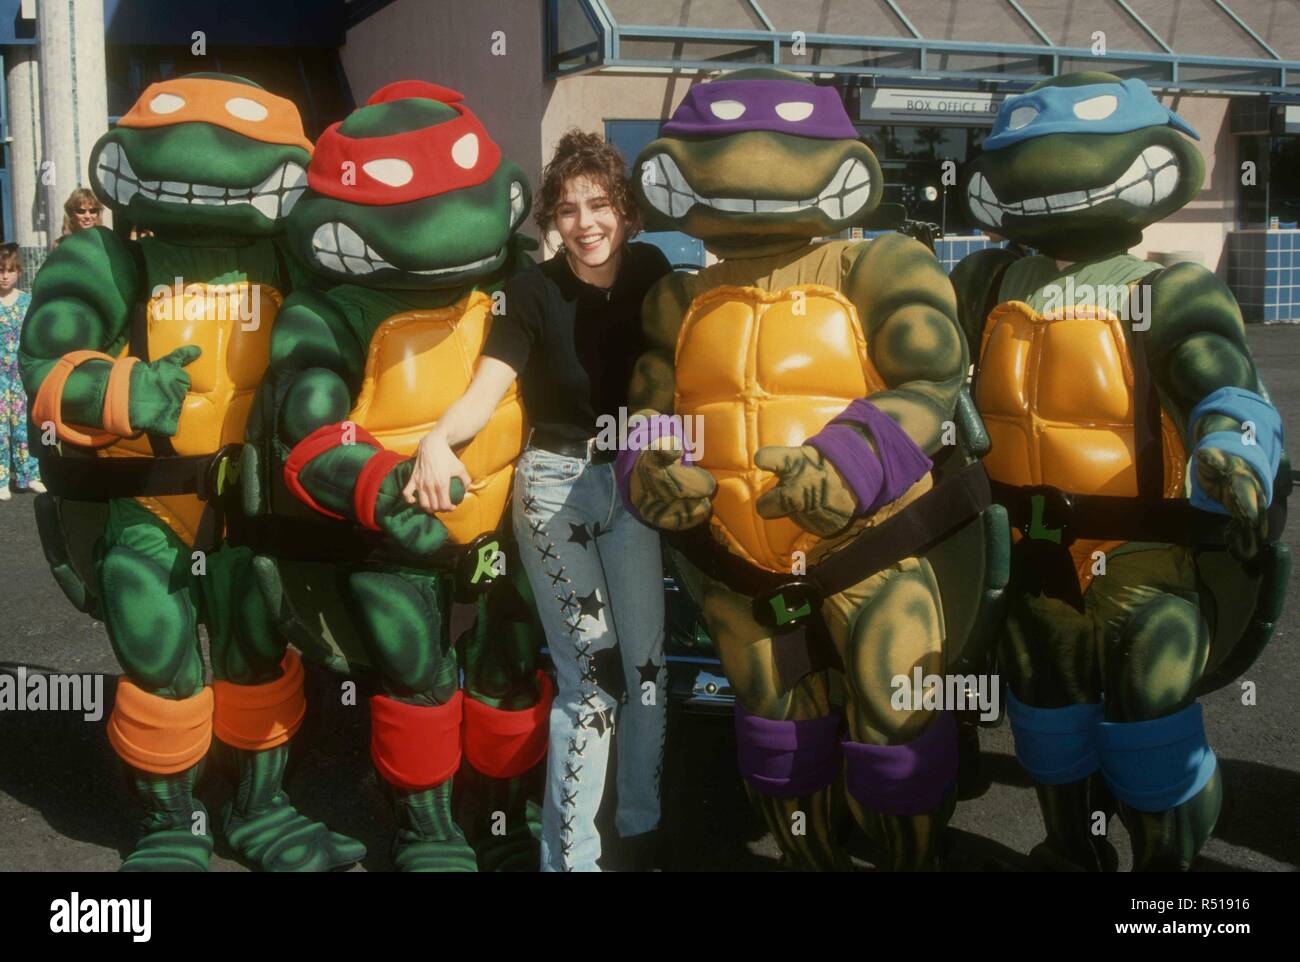 UNIVERSAL CITY, CA - MARCH 6: Actress Paige Turco attend 'Teenage Mutant Ninja Turtles III' Premiere on March 6, 1993 at Cineplex Odeon Cinema in Universal City, California. Photo by Barry King/Alamy Stock Photo Stock Photo